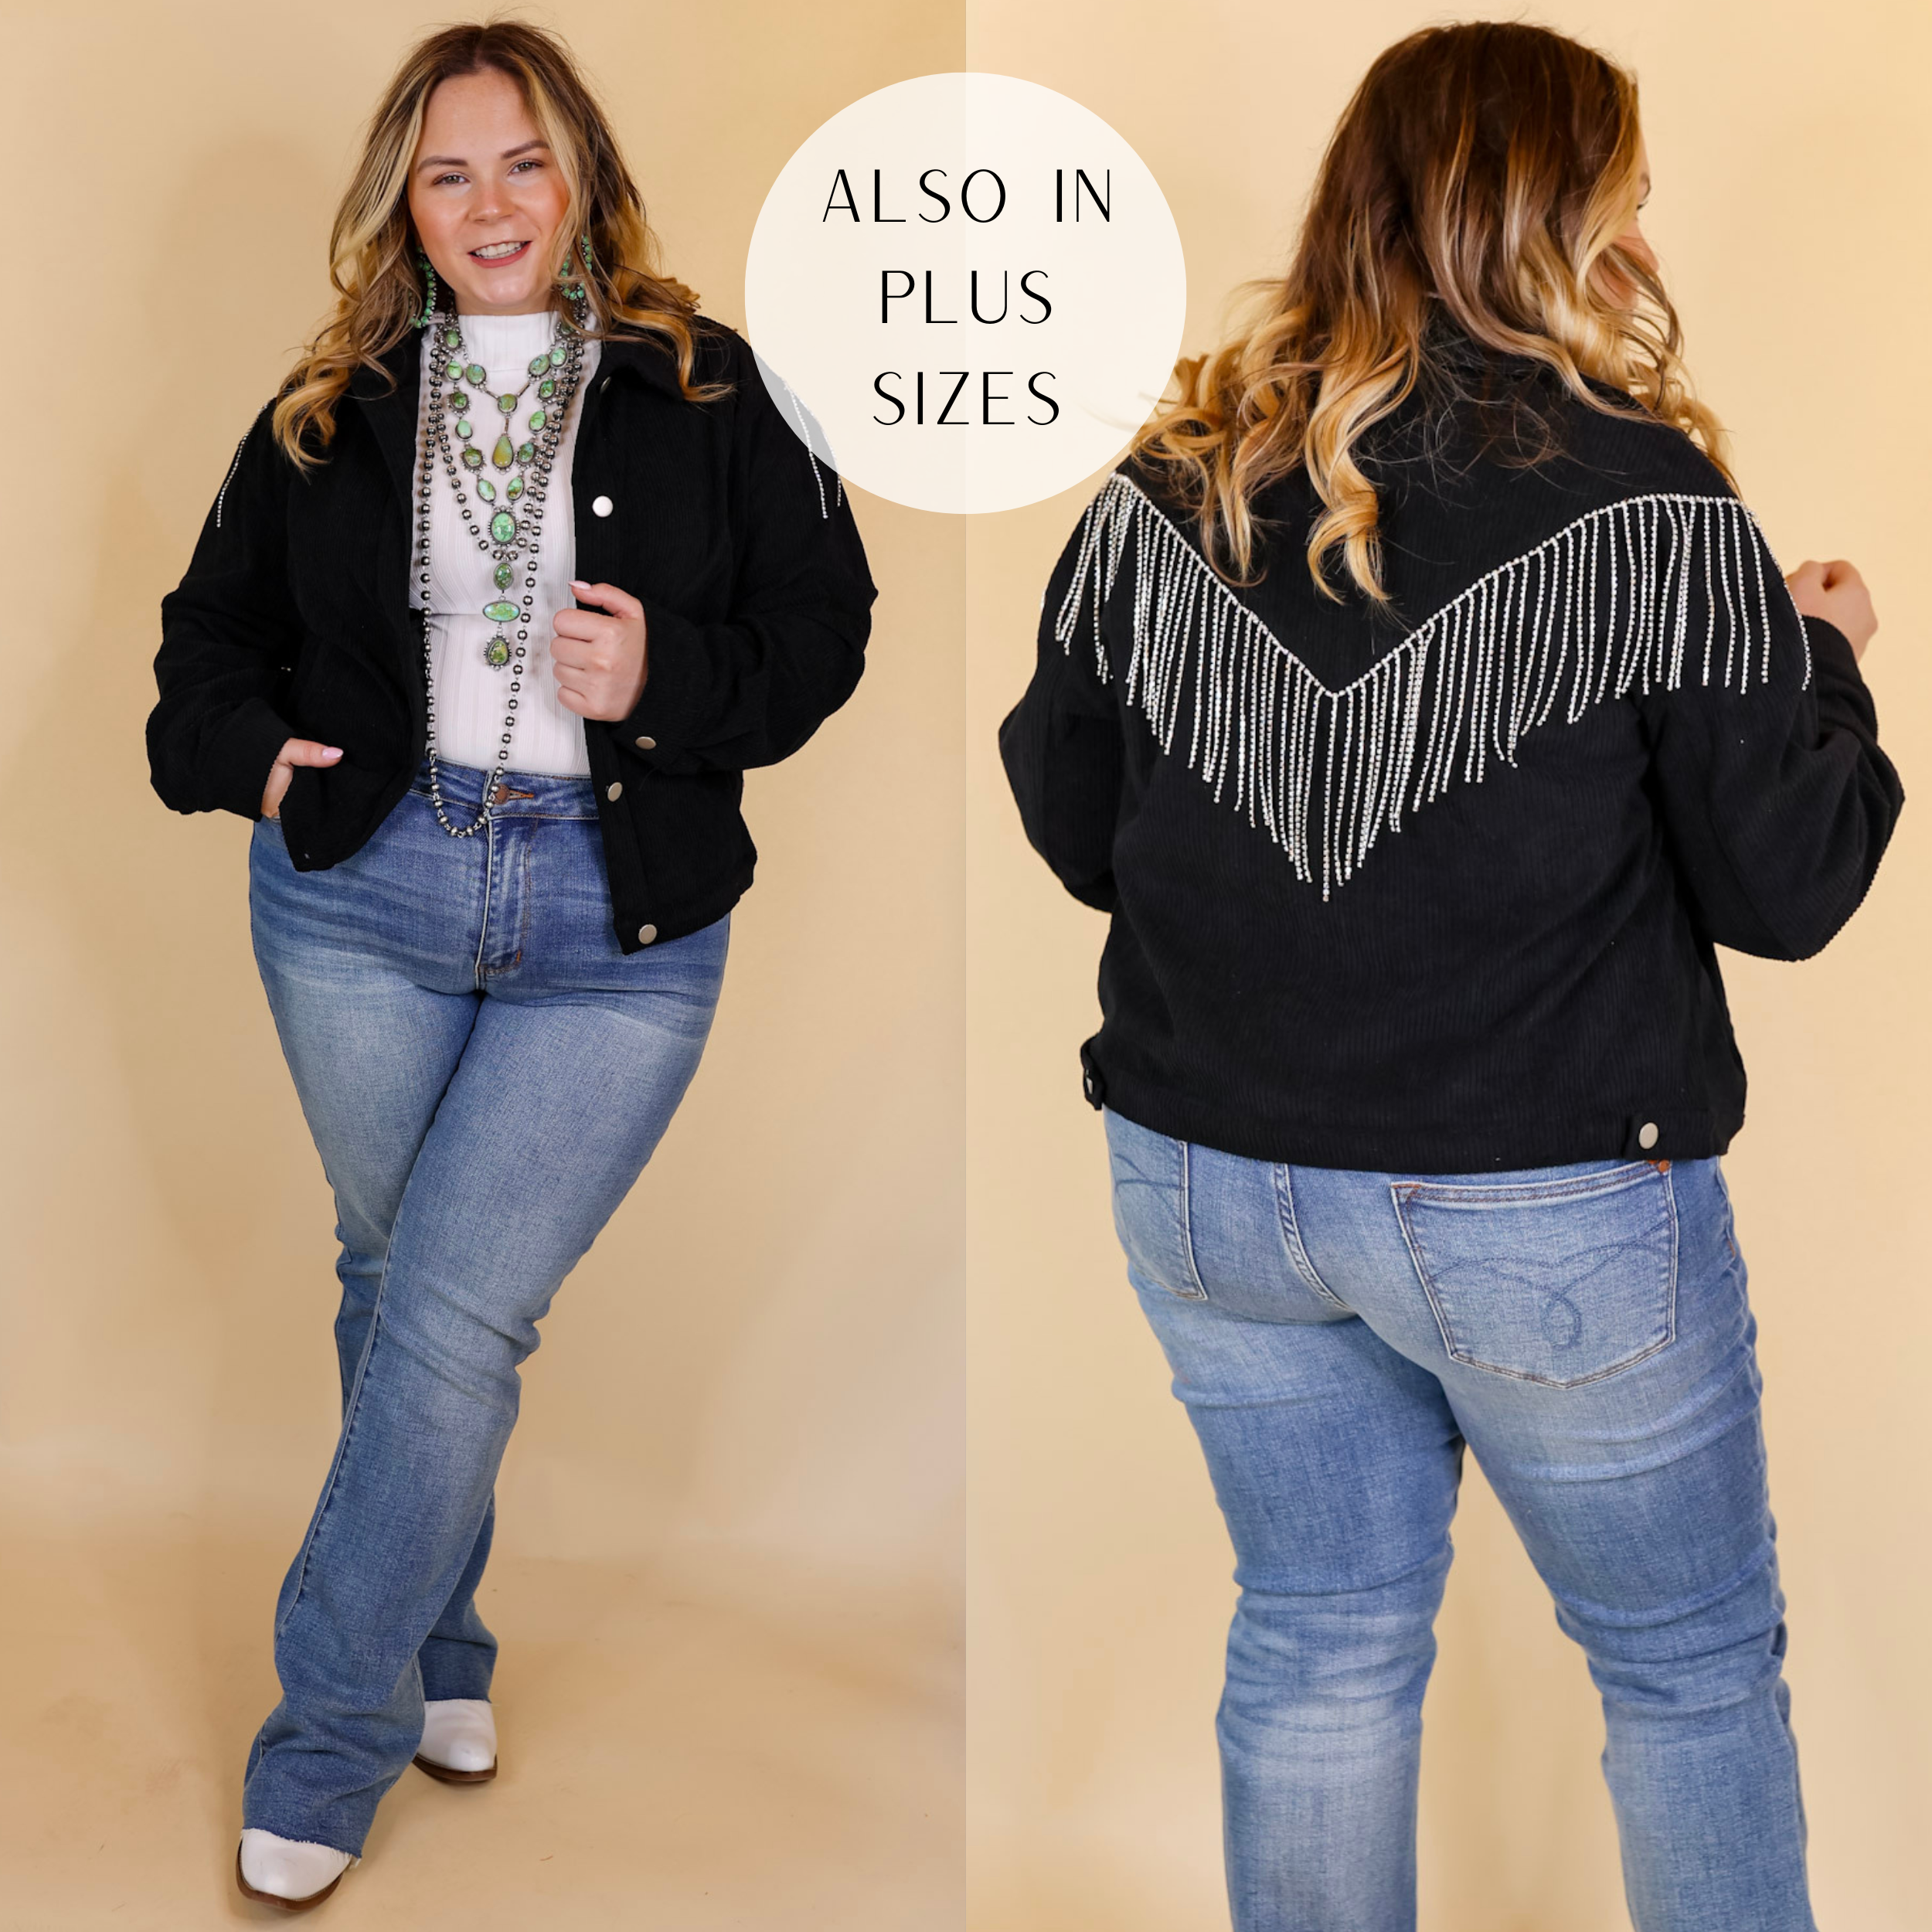 Model is wearing a button down corduroy shacket with crystal fringe along the back, in black. Model has this shacket paired with a white tank top, jeans, boots, and navajo jewelry. Background is solid tan.